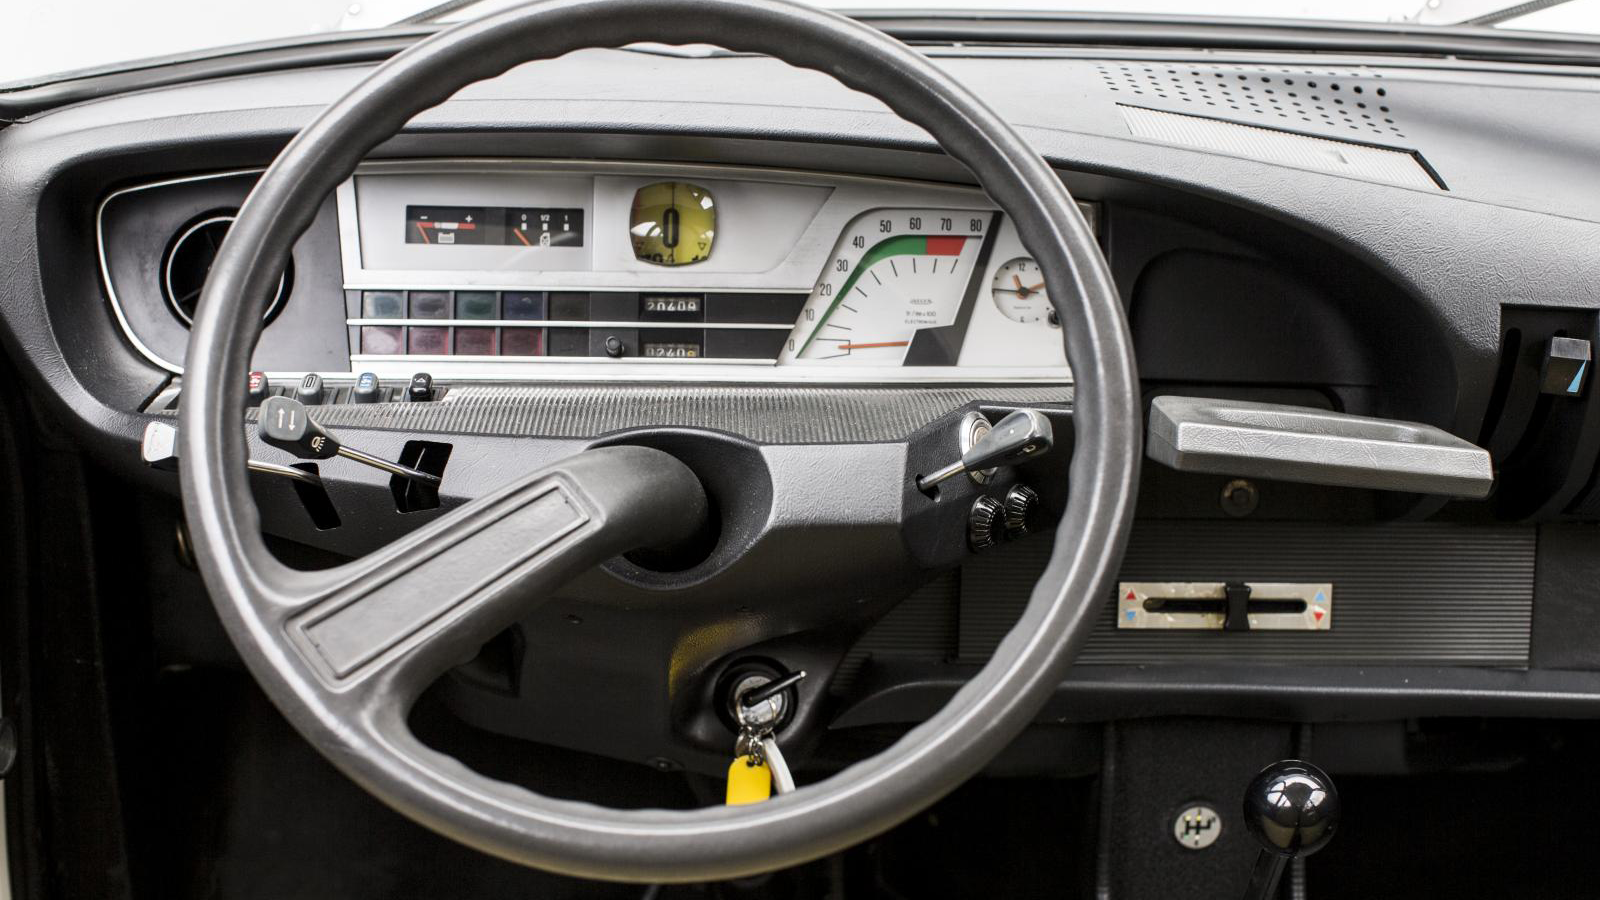 14 classic dashboards you’d never see in a modern car